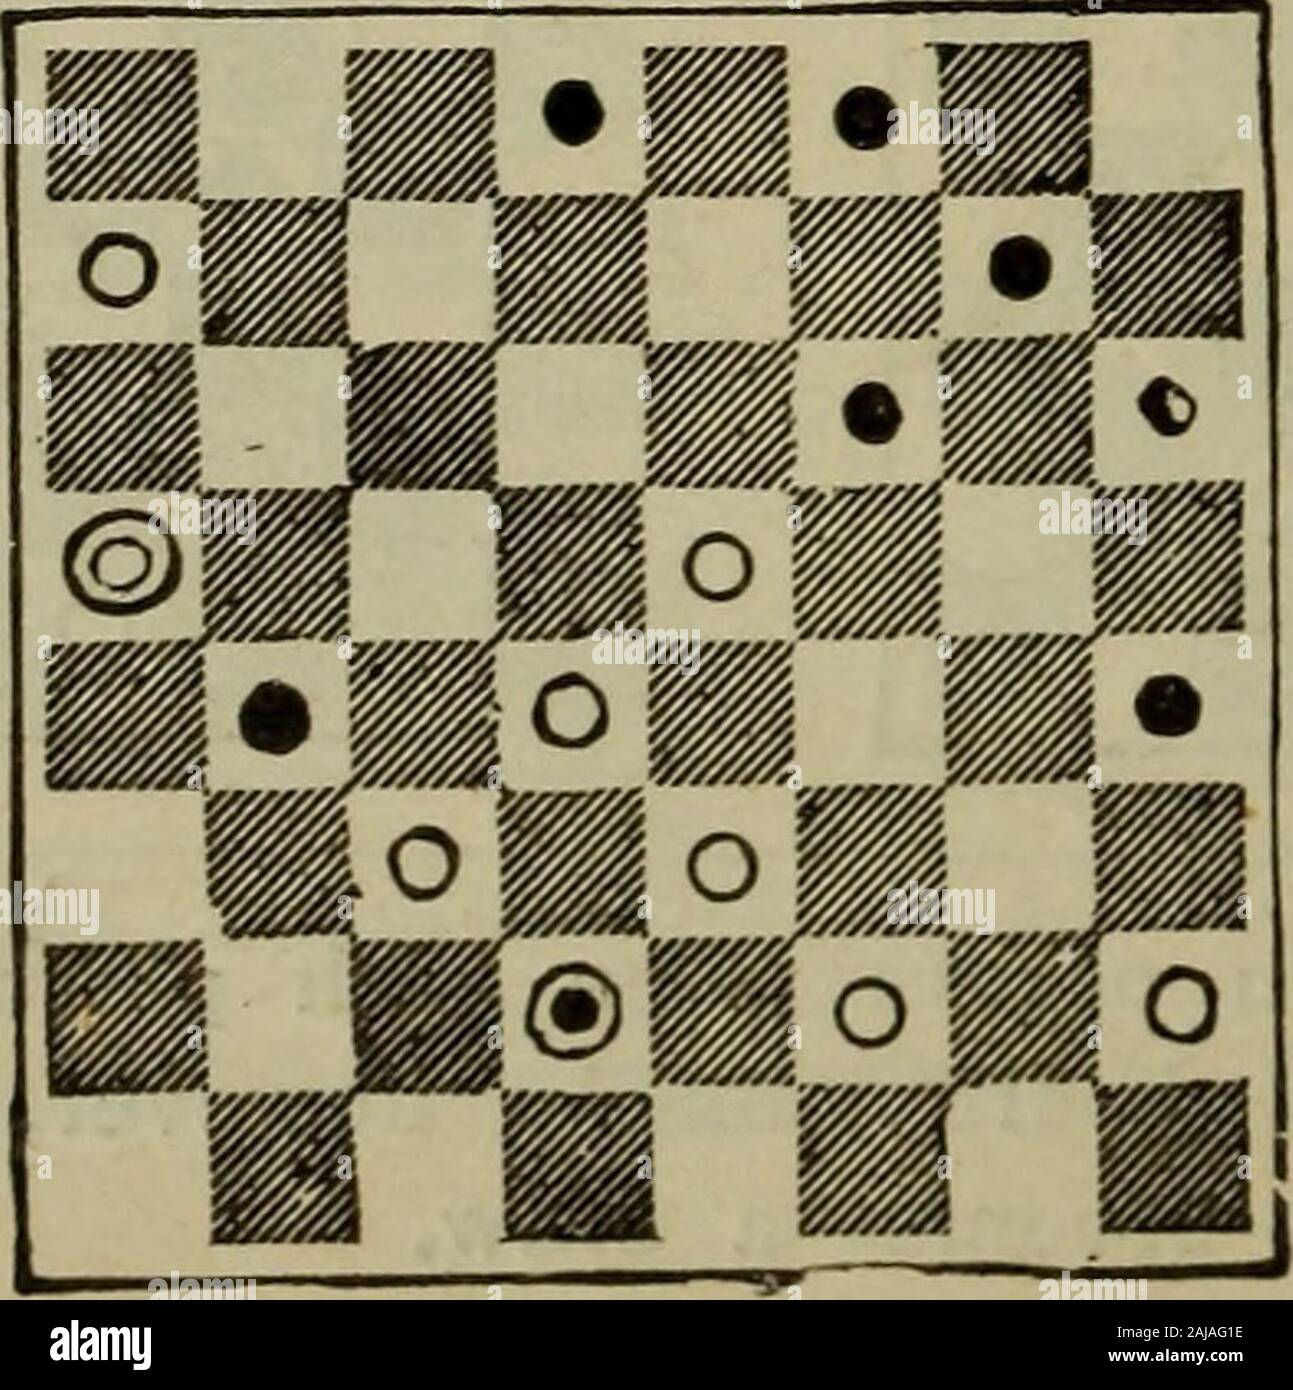 The standard Hoyle; a complete guide and reliable authority upon all games of chance or skill now played in the United States, whether of native or foreign introduction . No. 12.White to move and win. t».i o H • ? o I I o Jl O [  ^ No. 13.. DRA UGHTS. 461 EXAMPLES OF GAMES, FROM STURGES. Oame 1. 4. 8* 25.21 11. 7 E. II.15 31.27 9.13 18.22 2. 9 22.18 24.20 ,; 7. 7- 3 28.19 15.22 27.23 W. wins. 5. 9 9.14 85.18 8.11 3. 7 25.22 8.11 Var. 23.18 A. 9-13 I. 6 29.25 II. 8 9.14 7.10 ^?-^^ r^ 4. 8 18.15 17.10 22.25 C. 6. 9Fc 25.22 B. wins. 6.15 10.14 31-27 12.16 27.24 25.29 9.13 24.20 Var. 8.12 31.27 27 Stock Photo